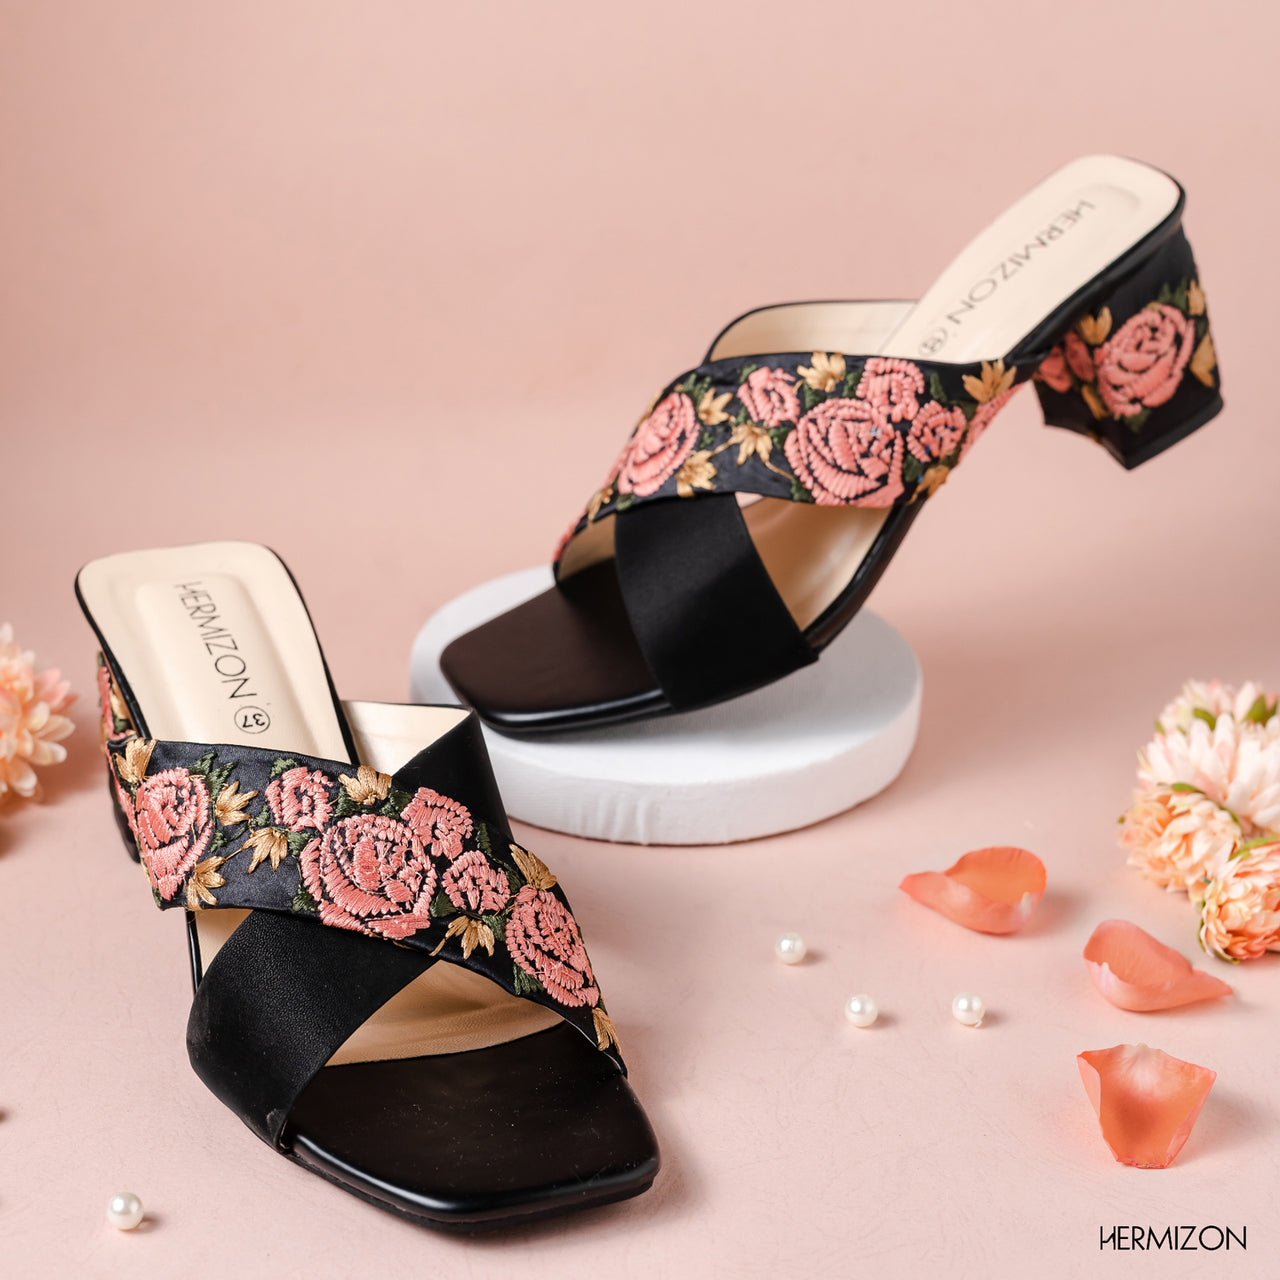 A black color shoe with rose embroidery design 